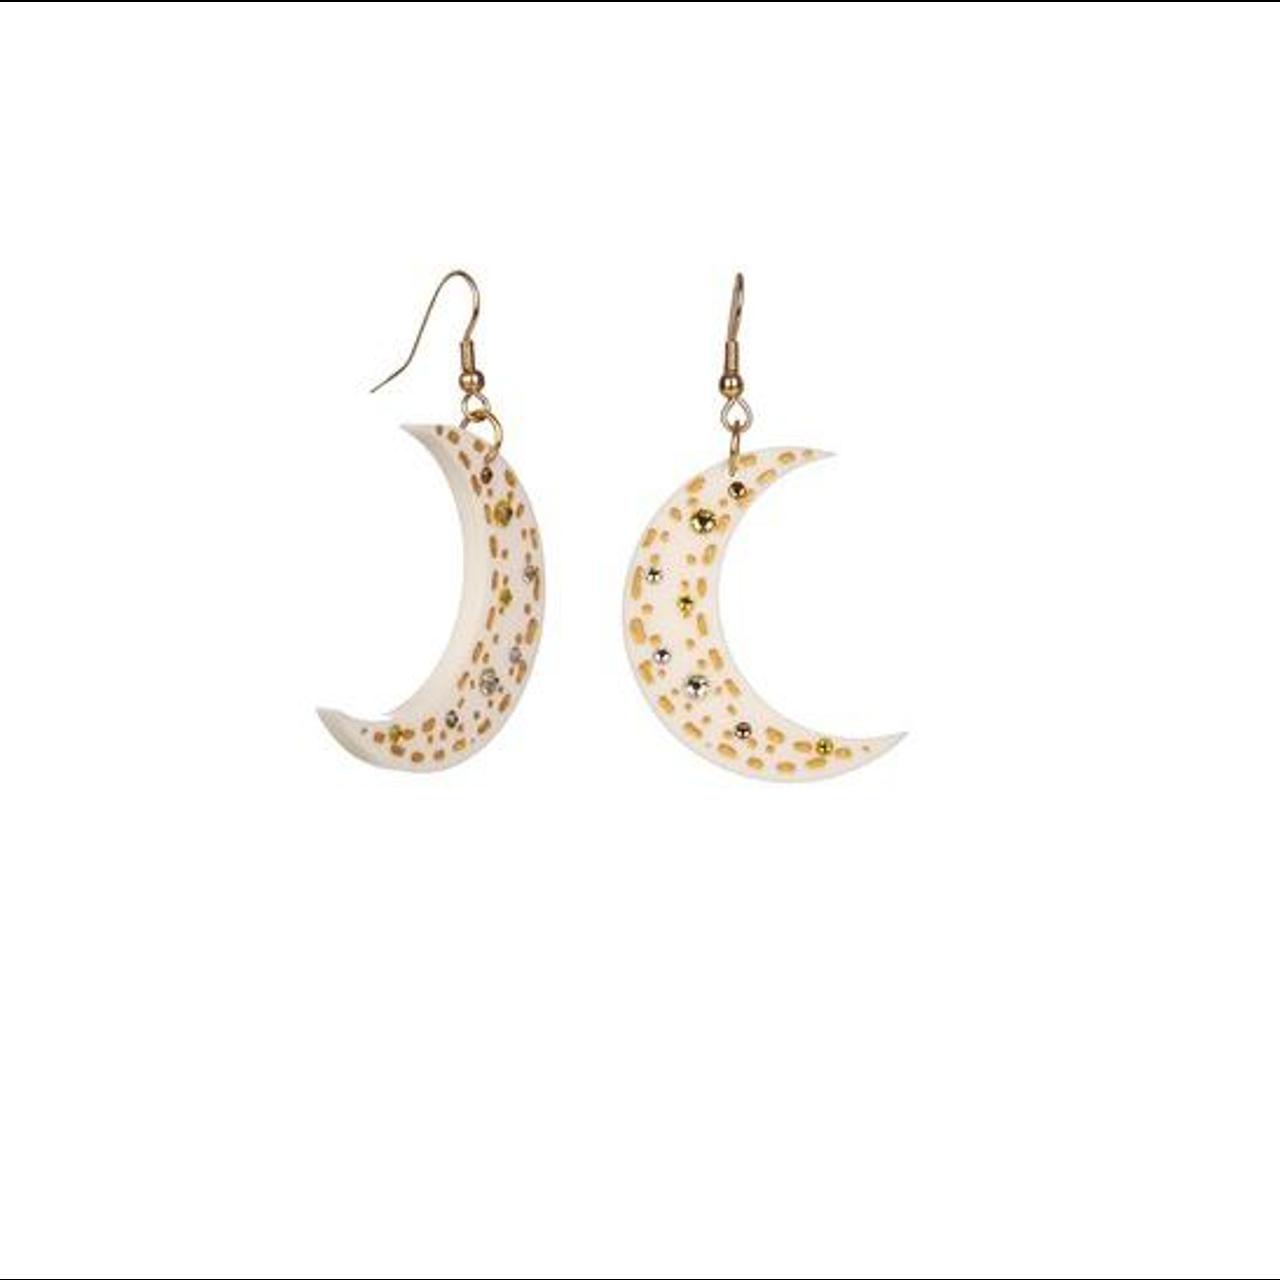 Product Image 3 - Free shipping!

A pair of enchanted